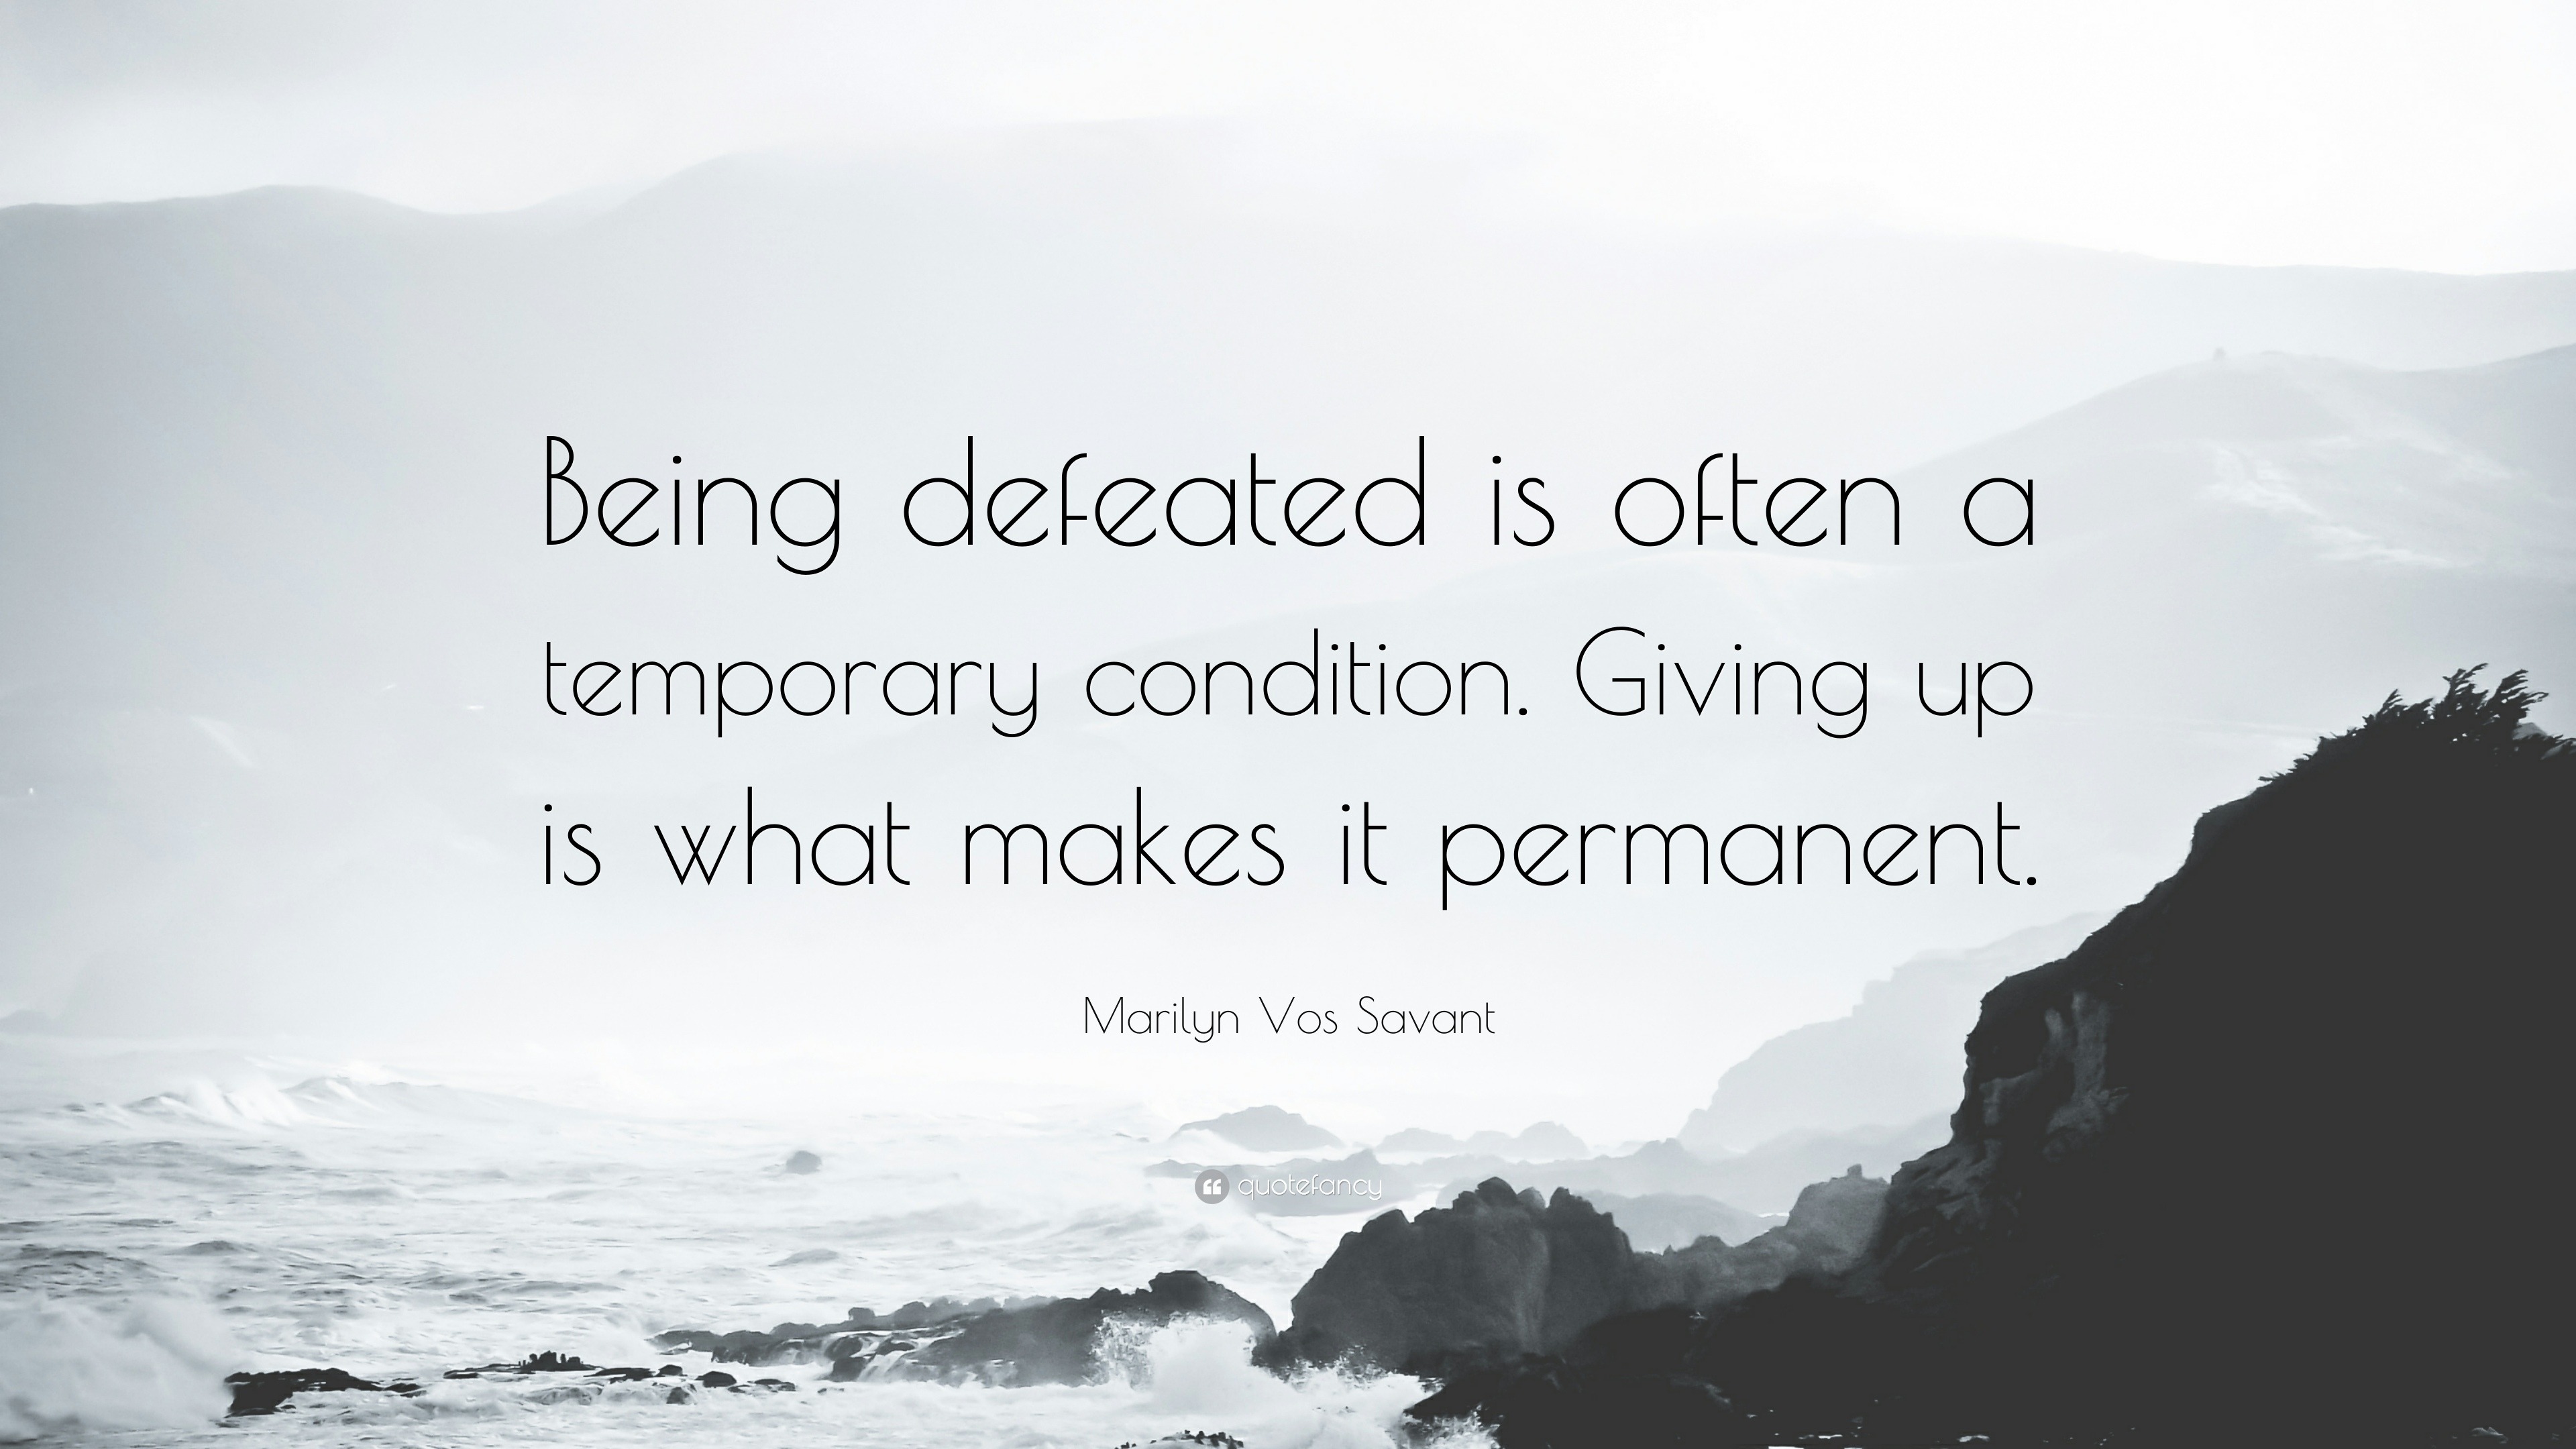 Being defeated is often a temporary condition. Giving up is what